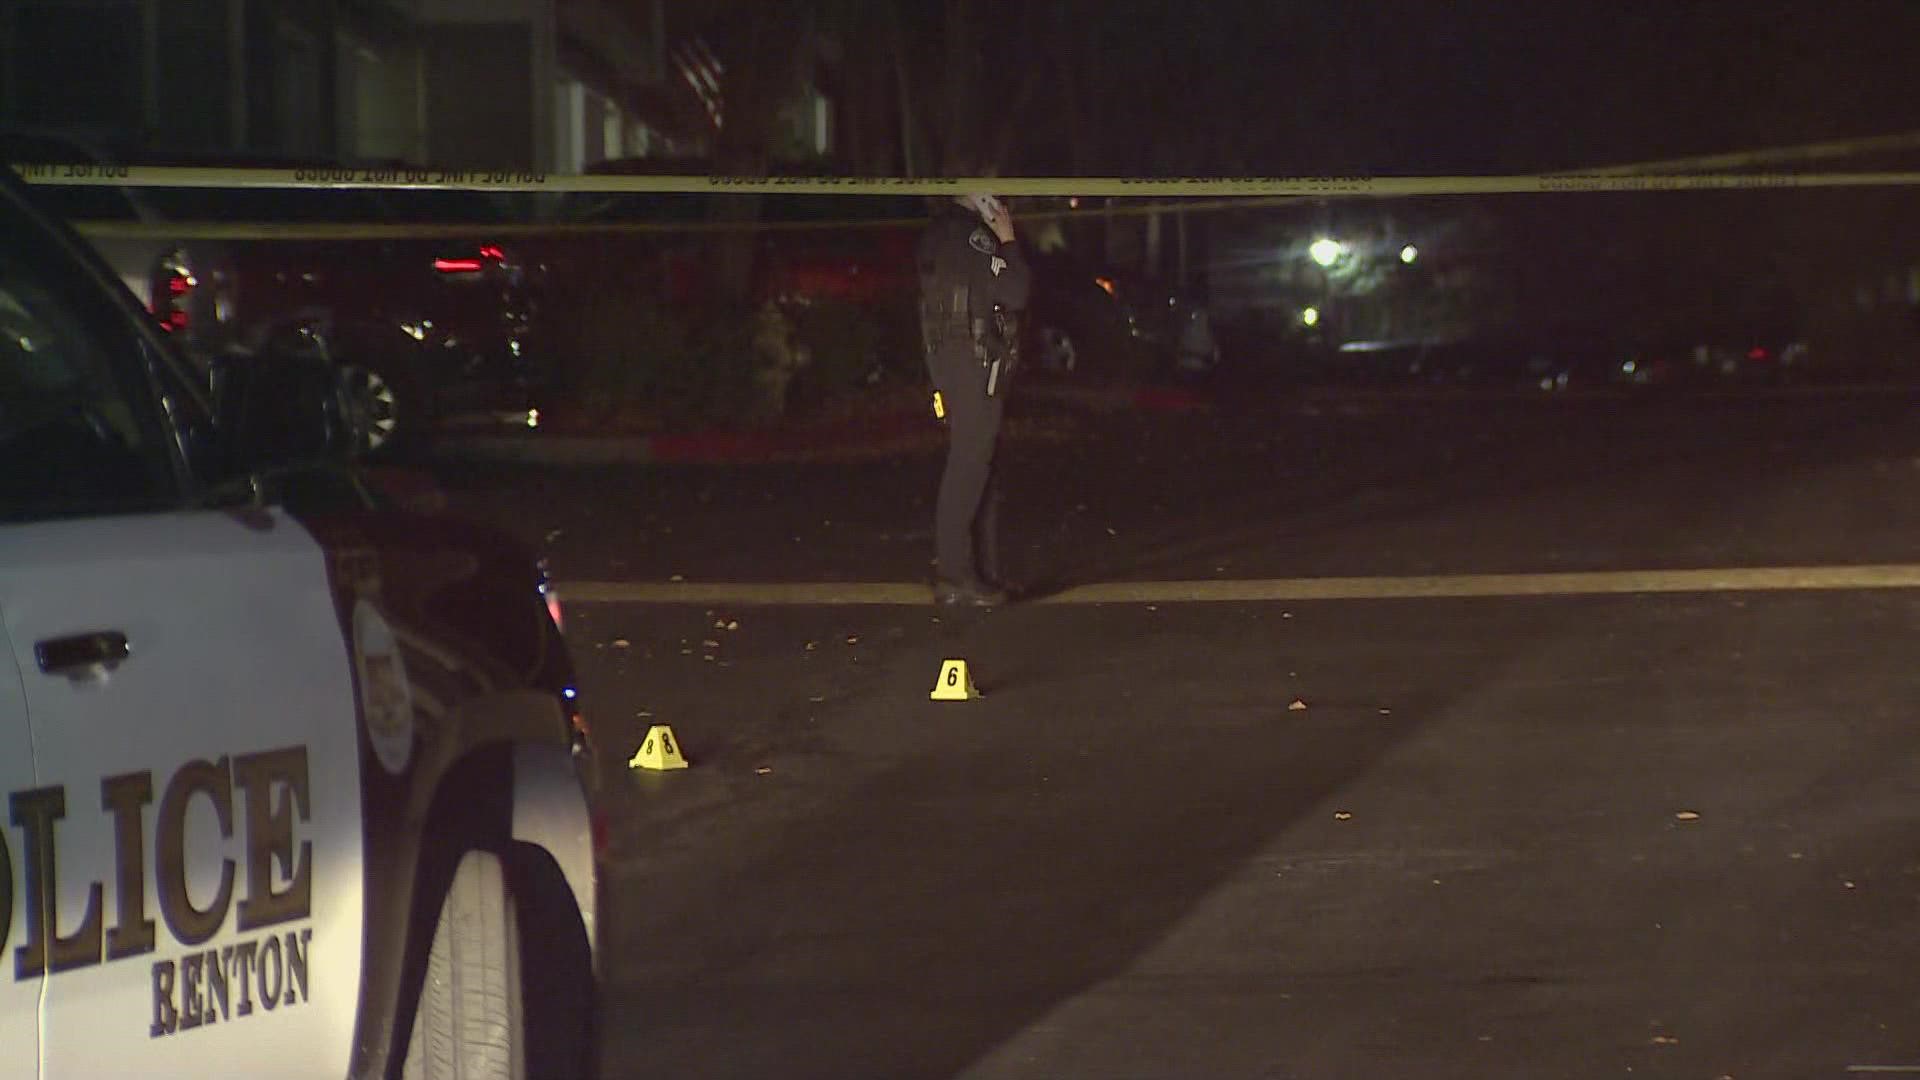 Police arrested a suspect that shot at an officer near Bella Vista Apartments in Renton.